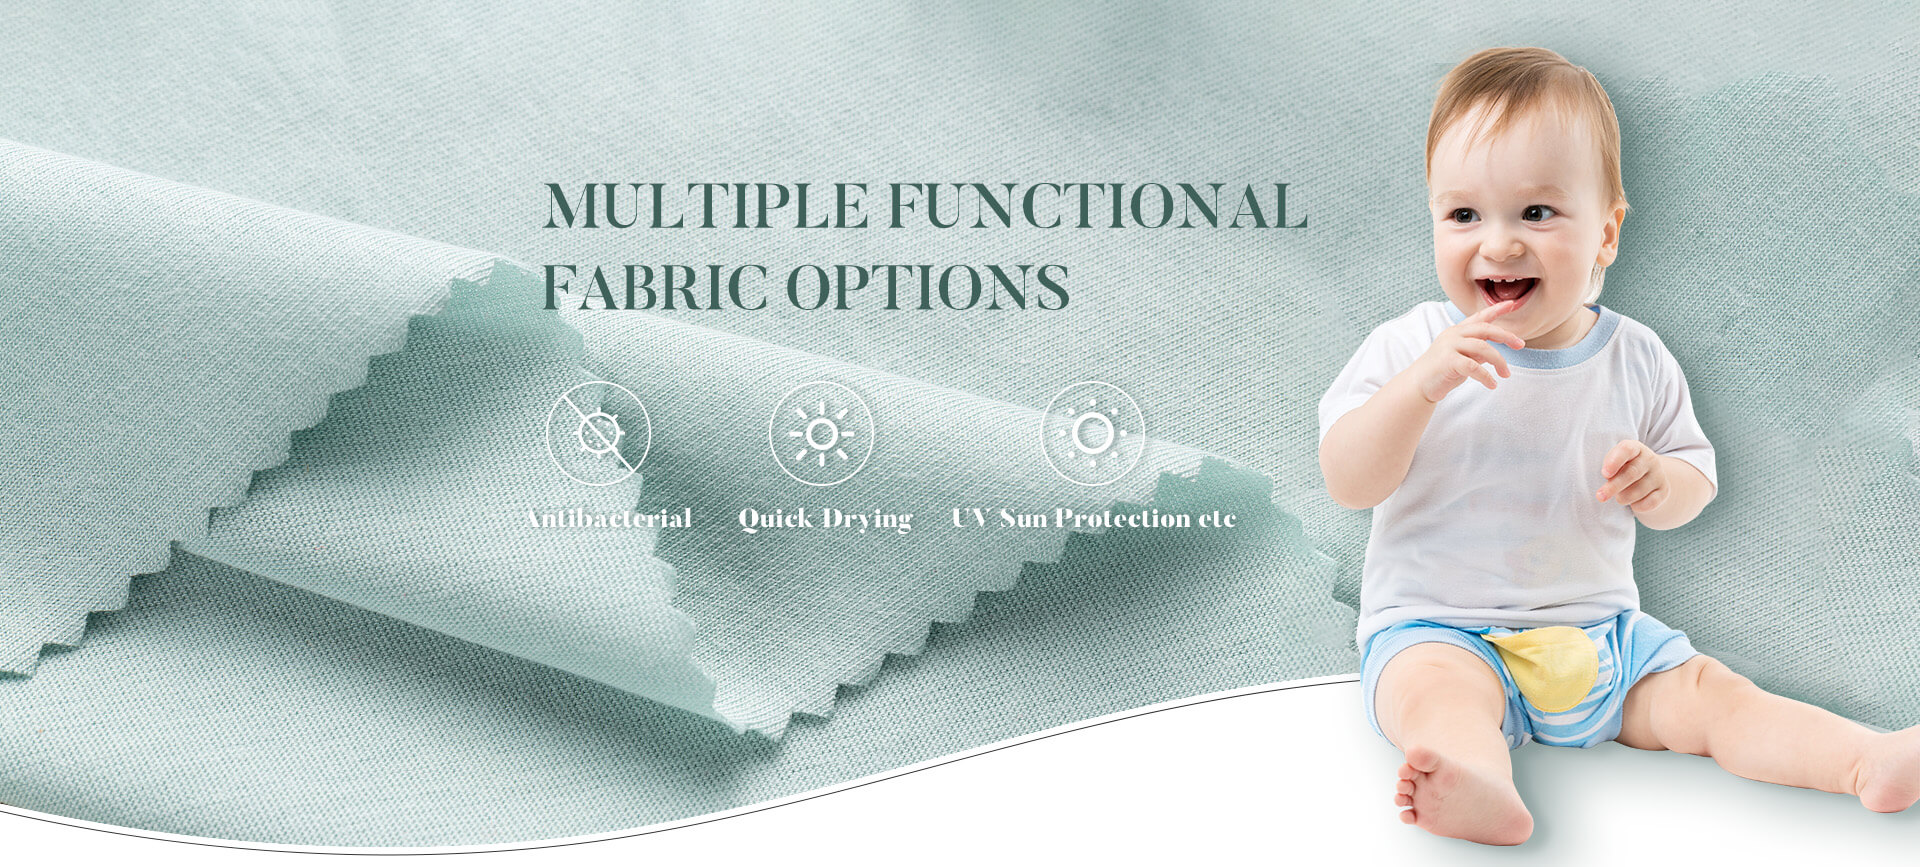 MULTIPLE FUNCTIONAL FABRIC OPTIONS